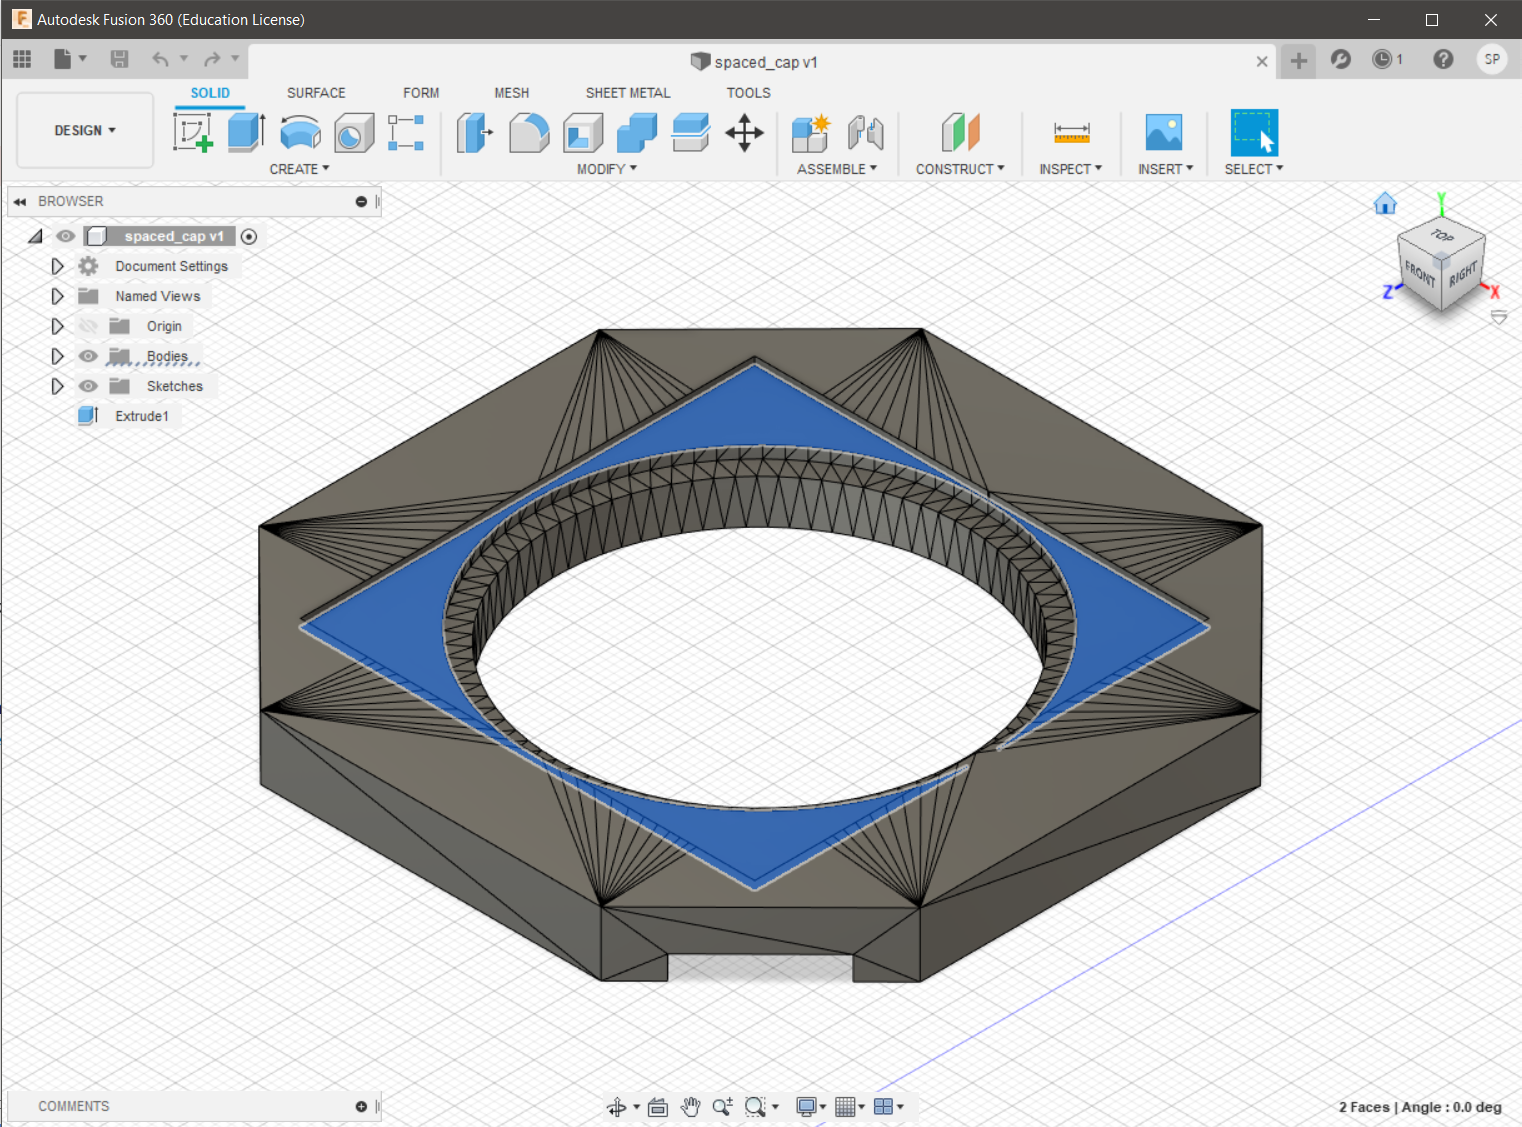 The first, simplest change in Fusion360. A great tool for designing but it isn't suited to edit complex meshes